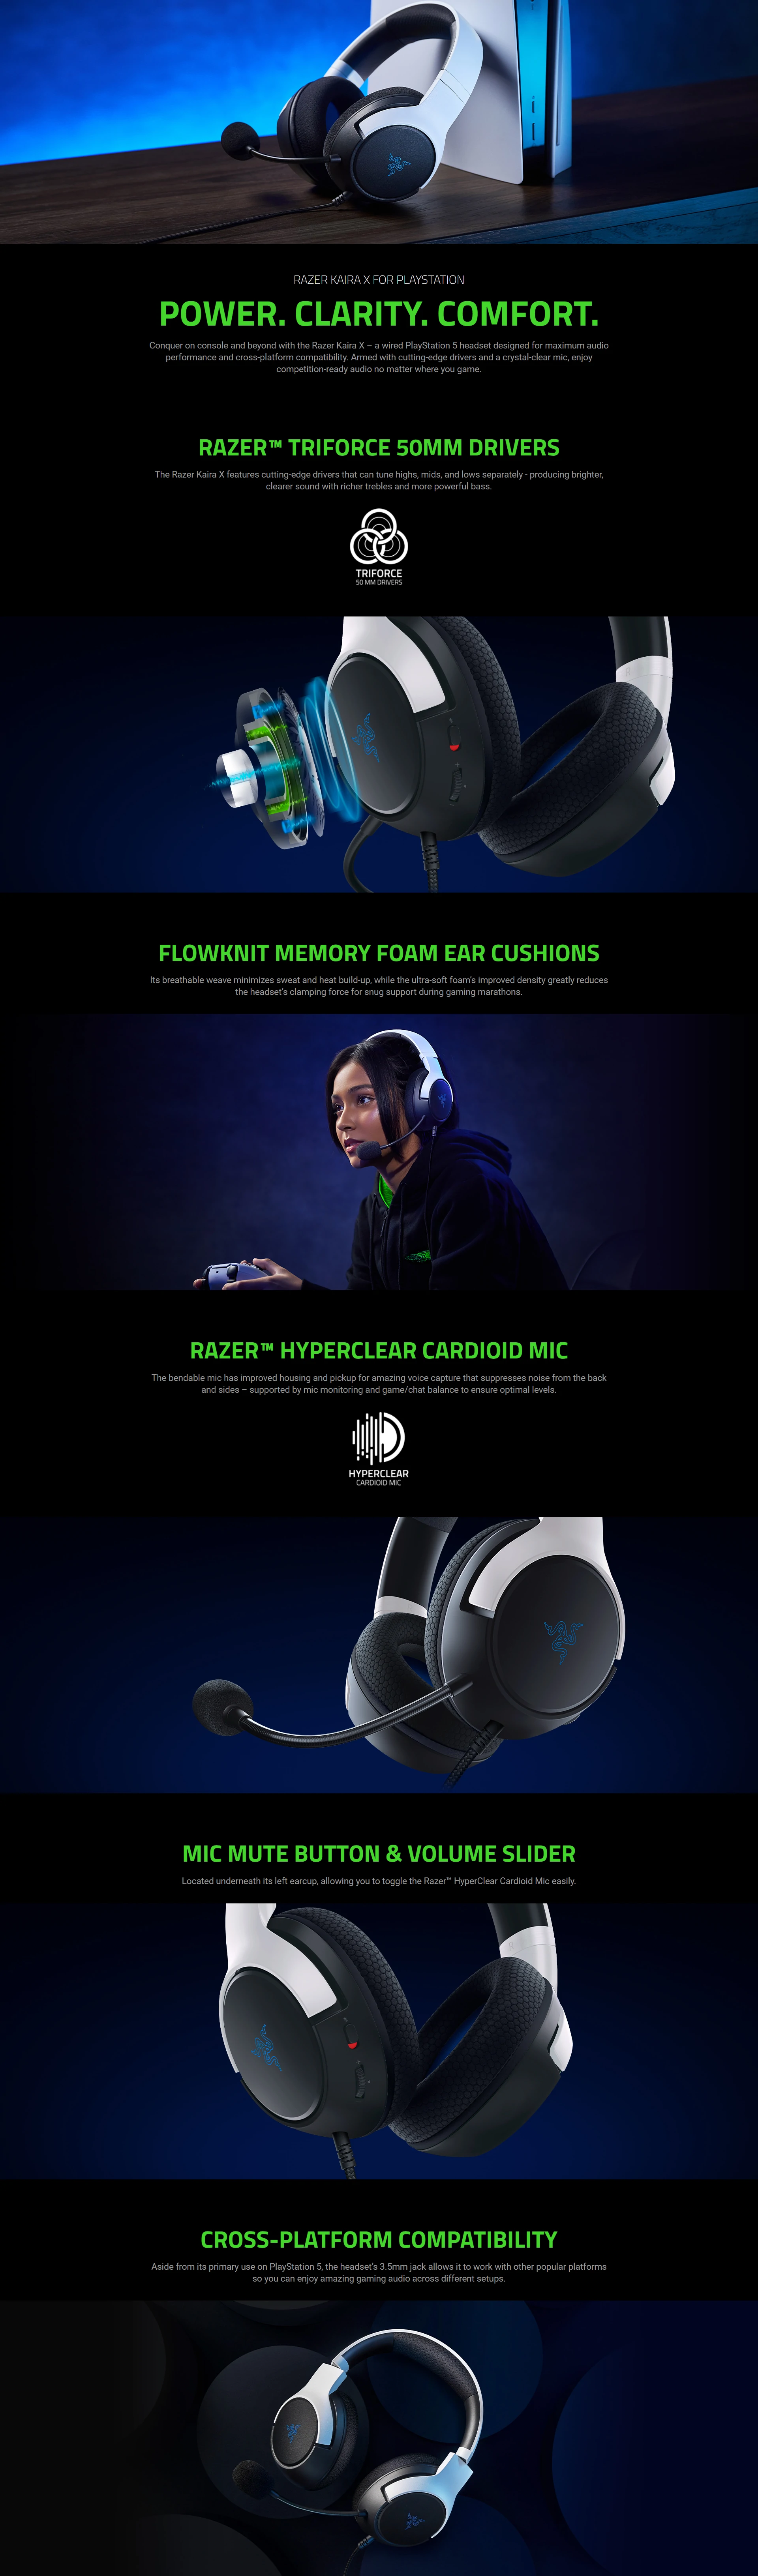 Overview - Razer Kaira X Wired Gaming Headset for PlayStation - White